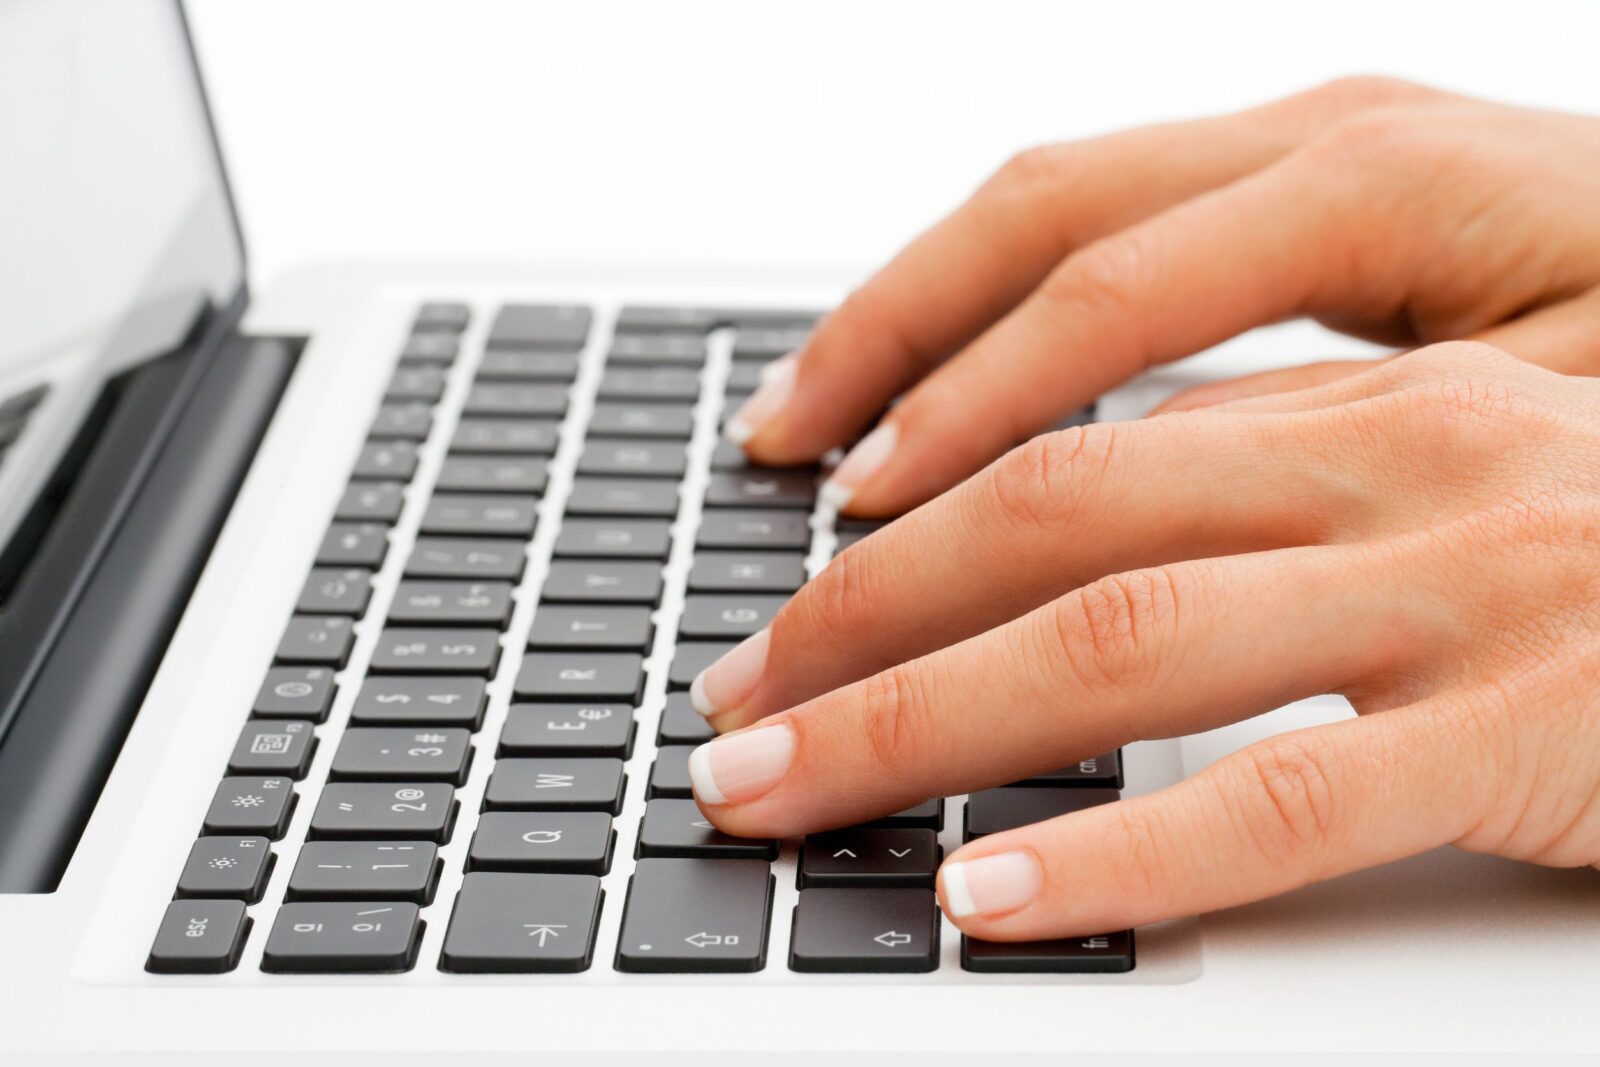 Hands Typing on Laptop Keyboard